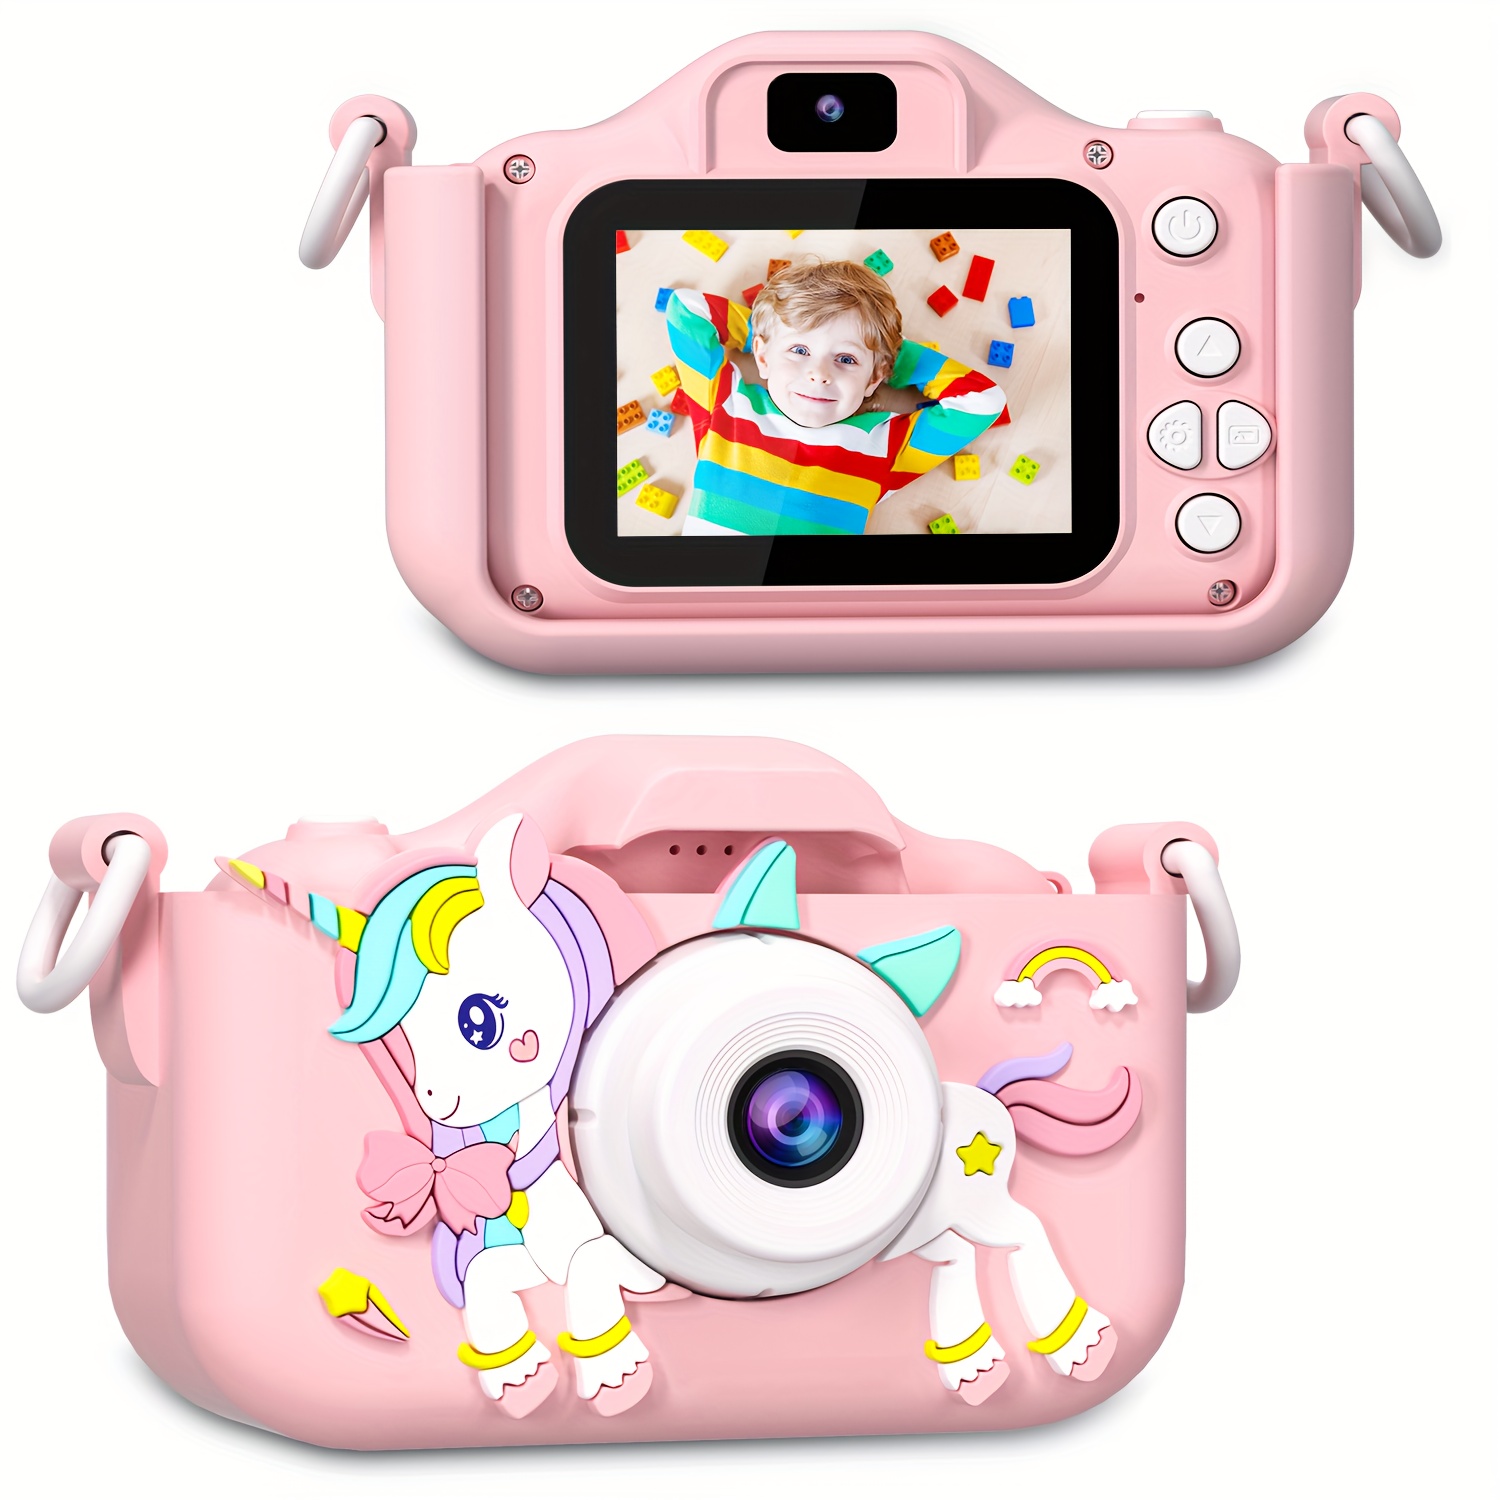  Unicorn Toys for 3-9 Year Old Girls,2 in 1 Rotating Unicorns  and Star Projection,2 to 6 Year Old Girl Birthday Easter Gifts,Unicorns  Gifts for Girls : Baby